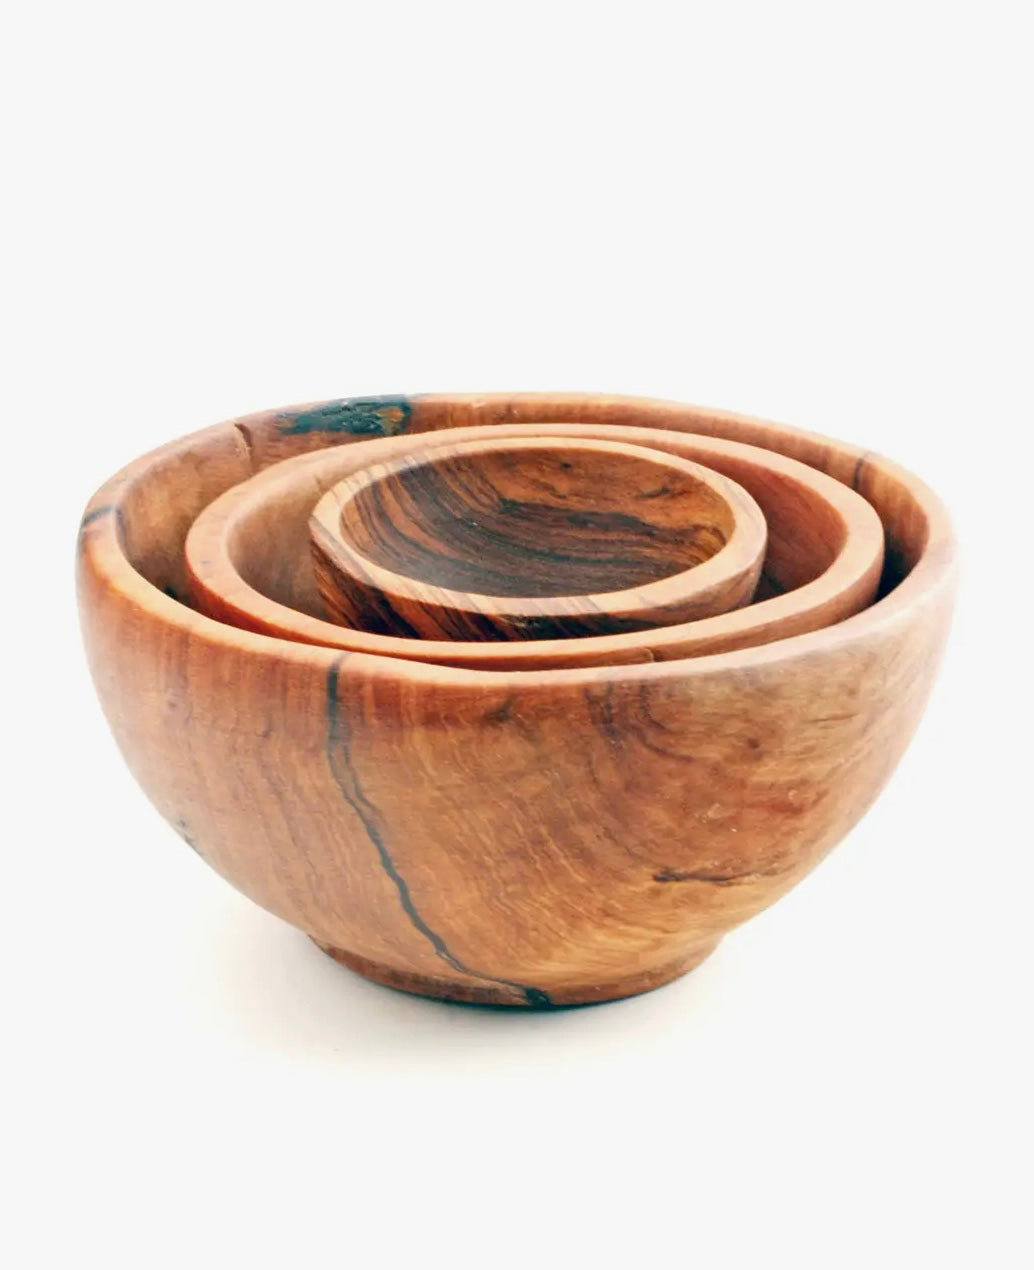 Set of 3 Wild Olivewood Condiment / Spice Bowls